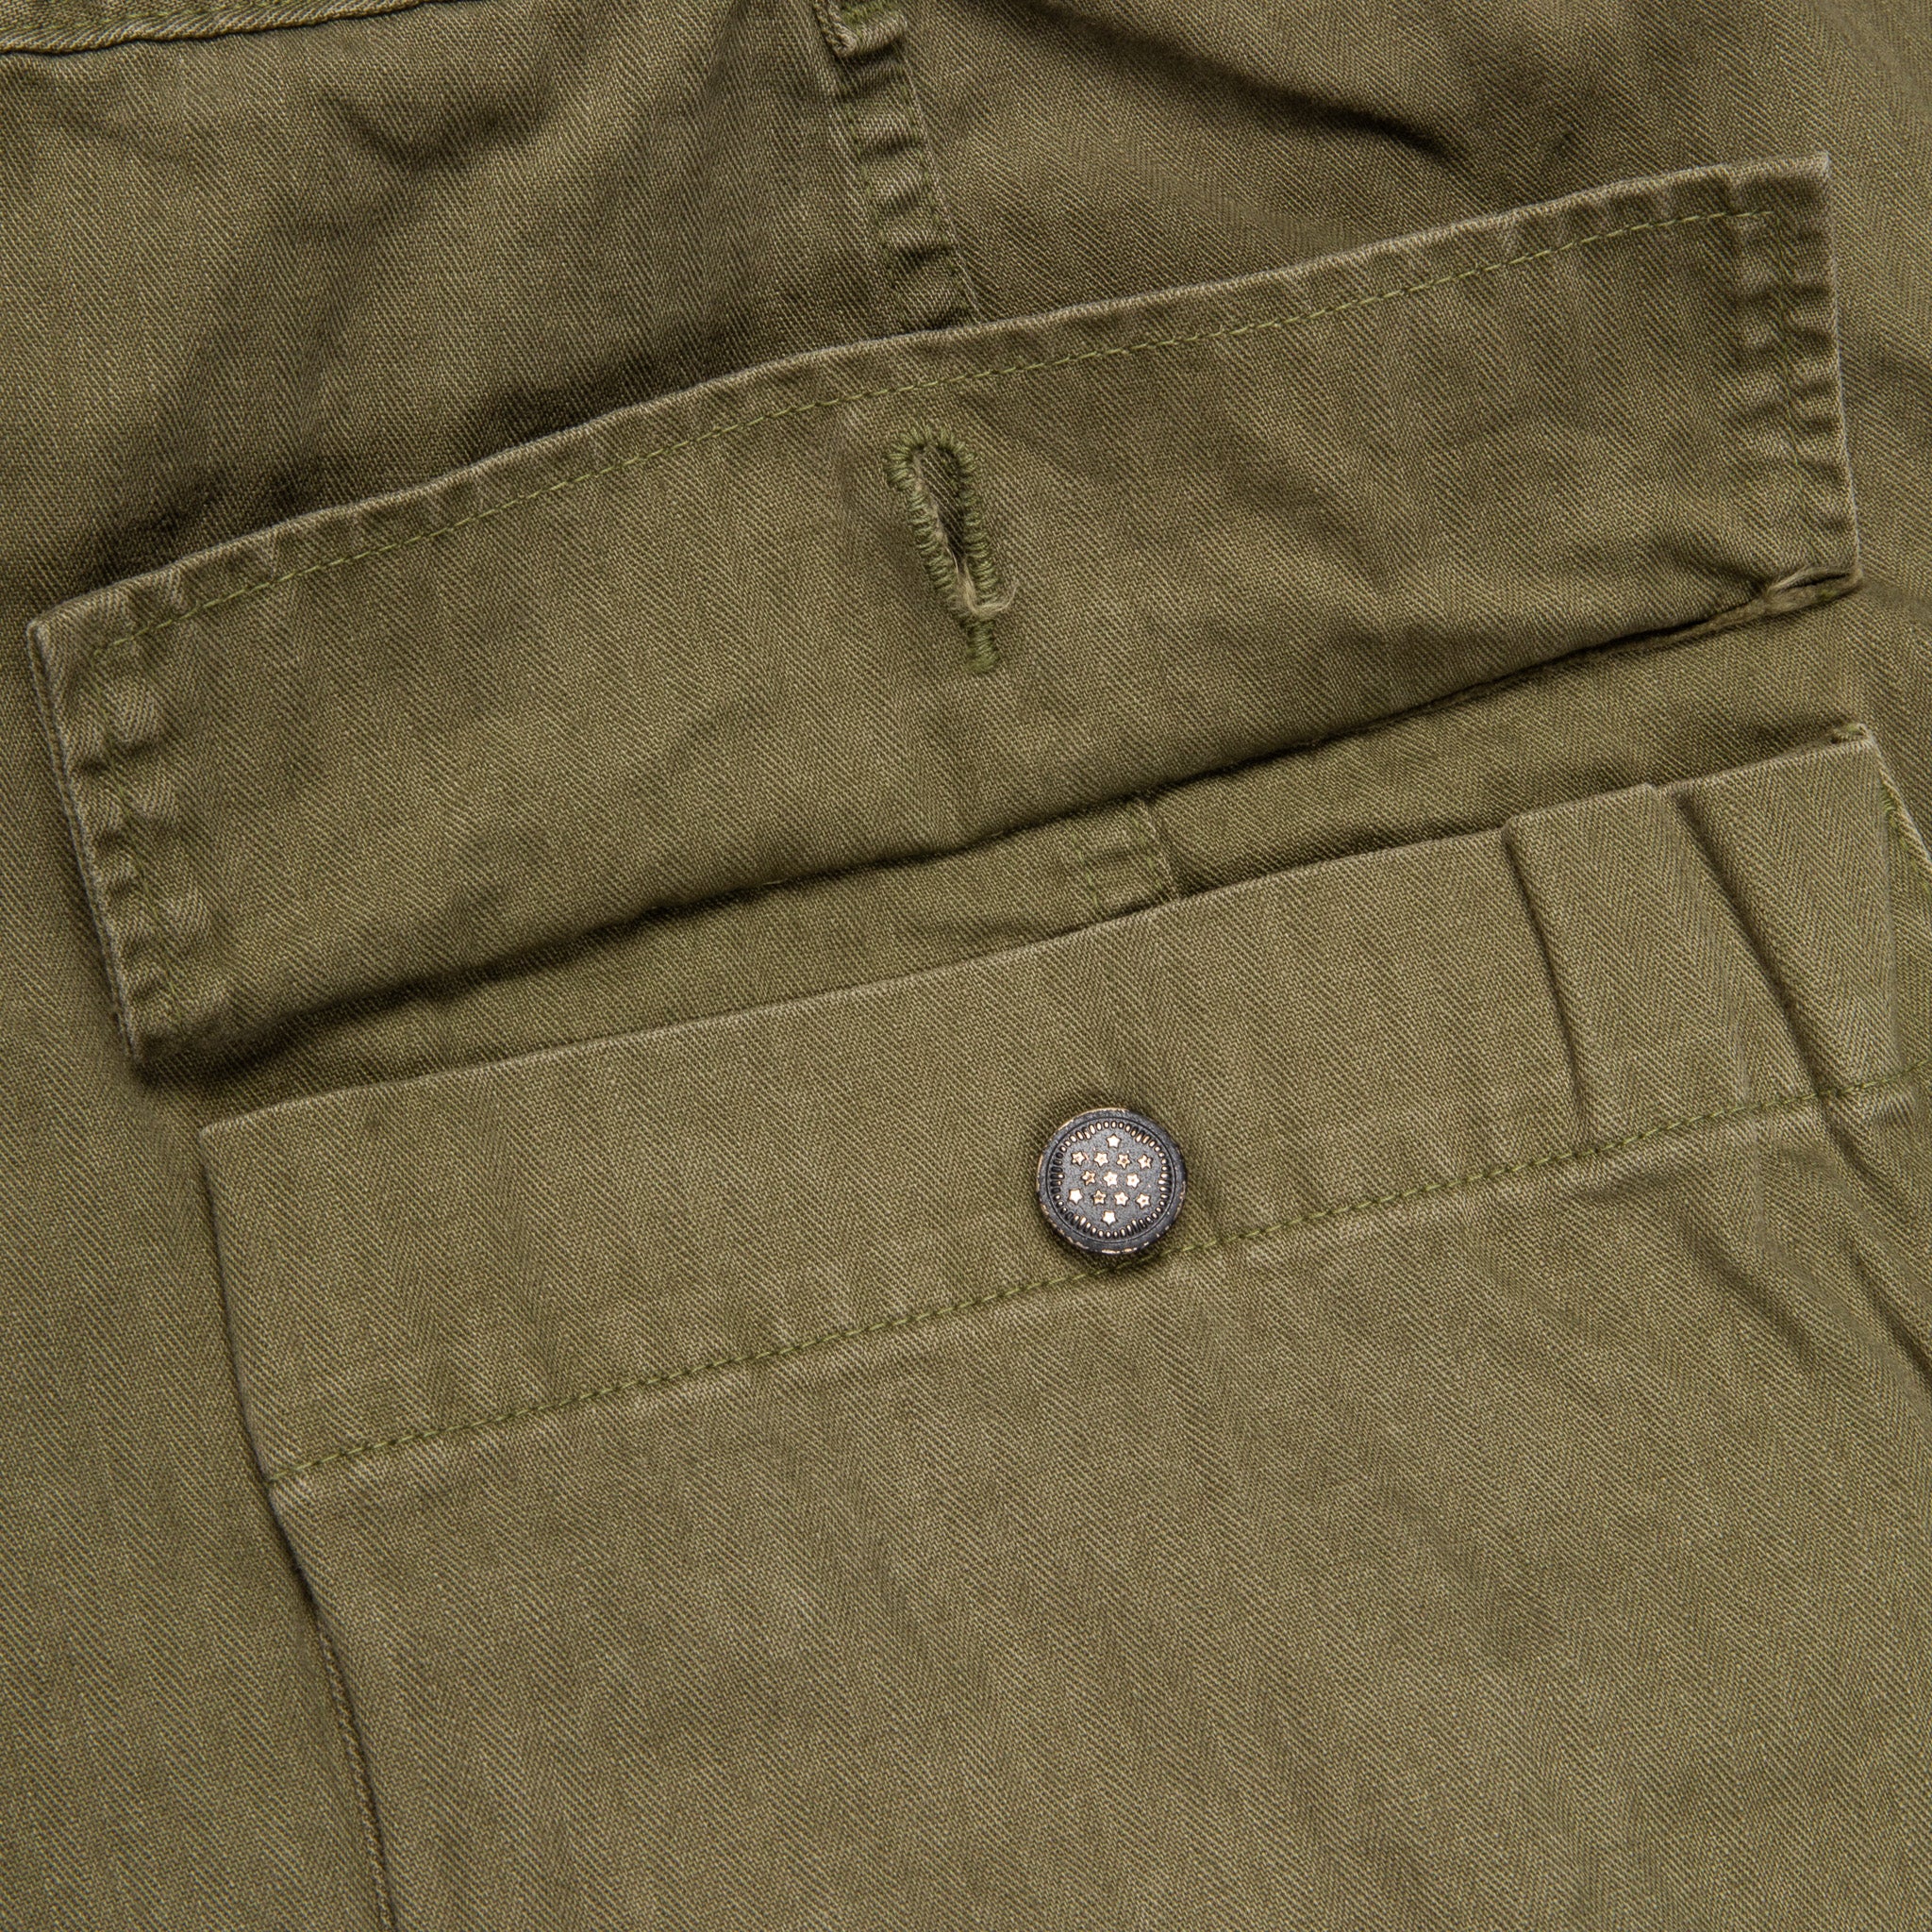 Orslow U.S Army 2 pocket cargo shorts Army Green – Frans Boone Store